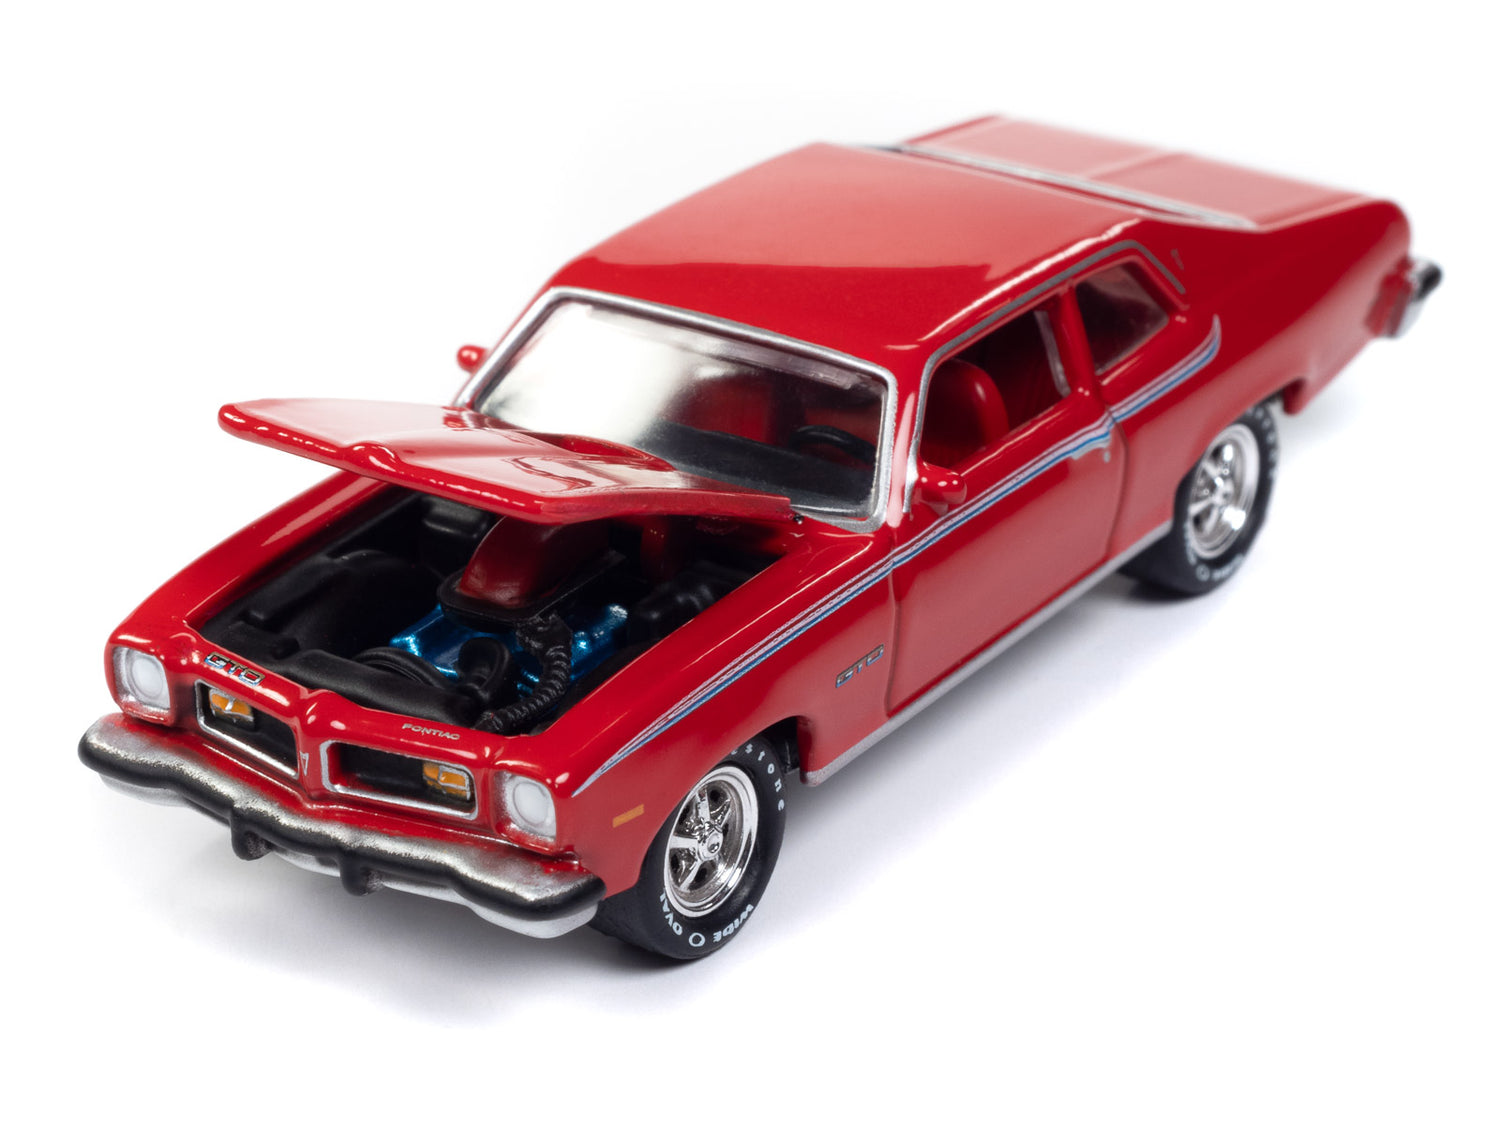 Johnny Lightning Classic Gold 1974 Pontiac GTO (Buccaneer Red) 1:64 Scale Diecast